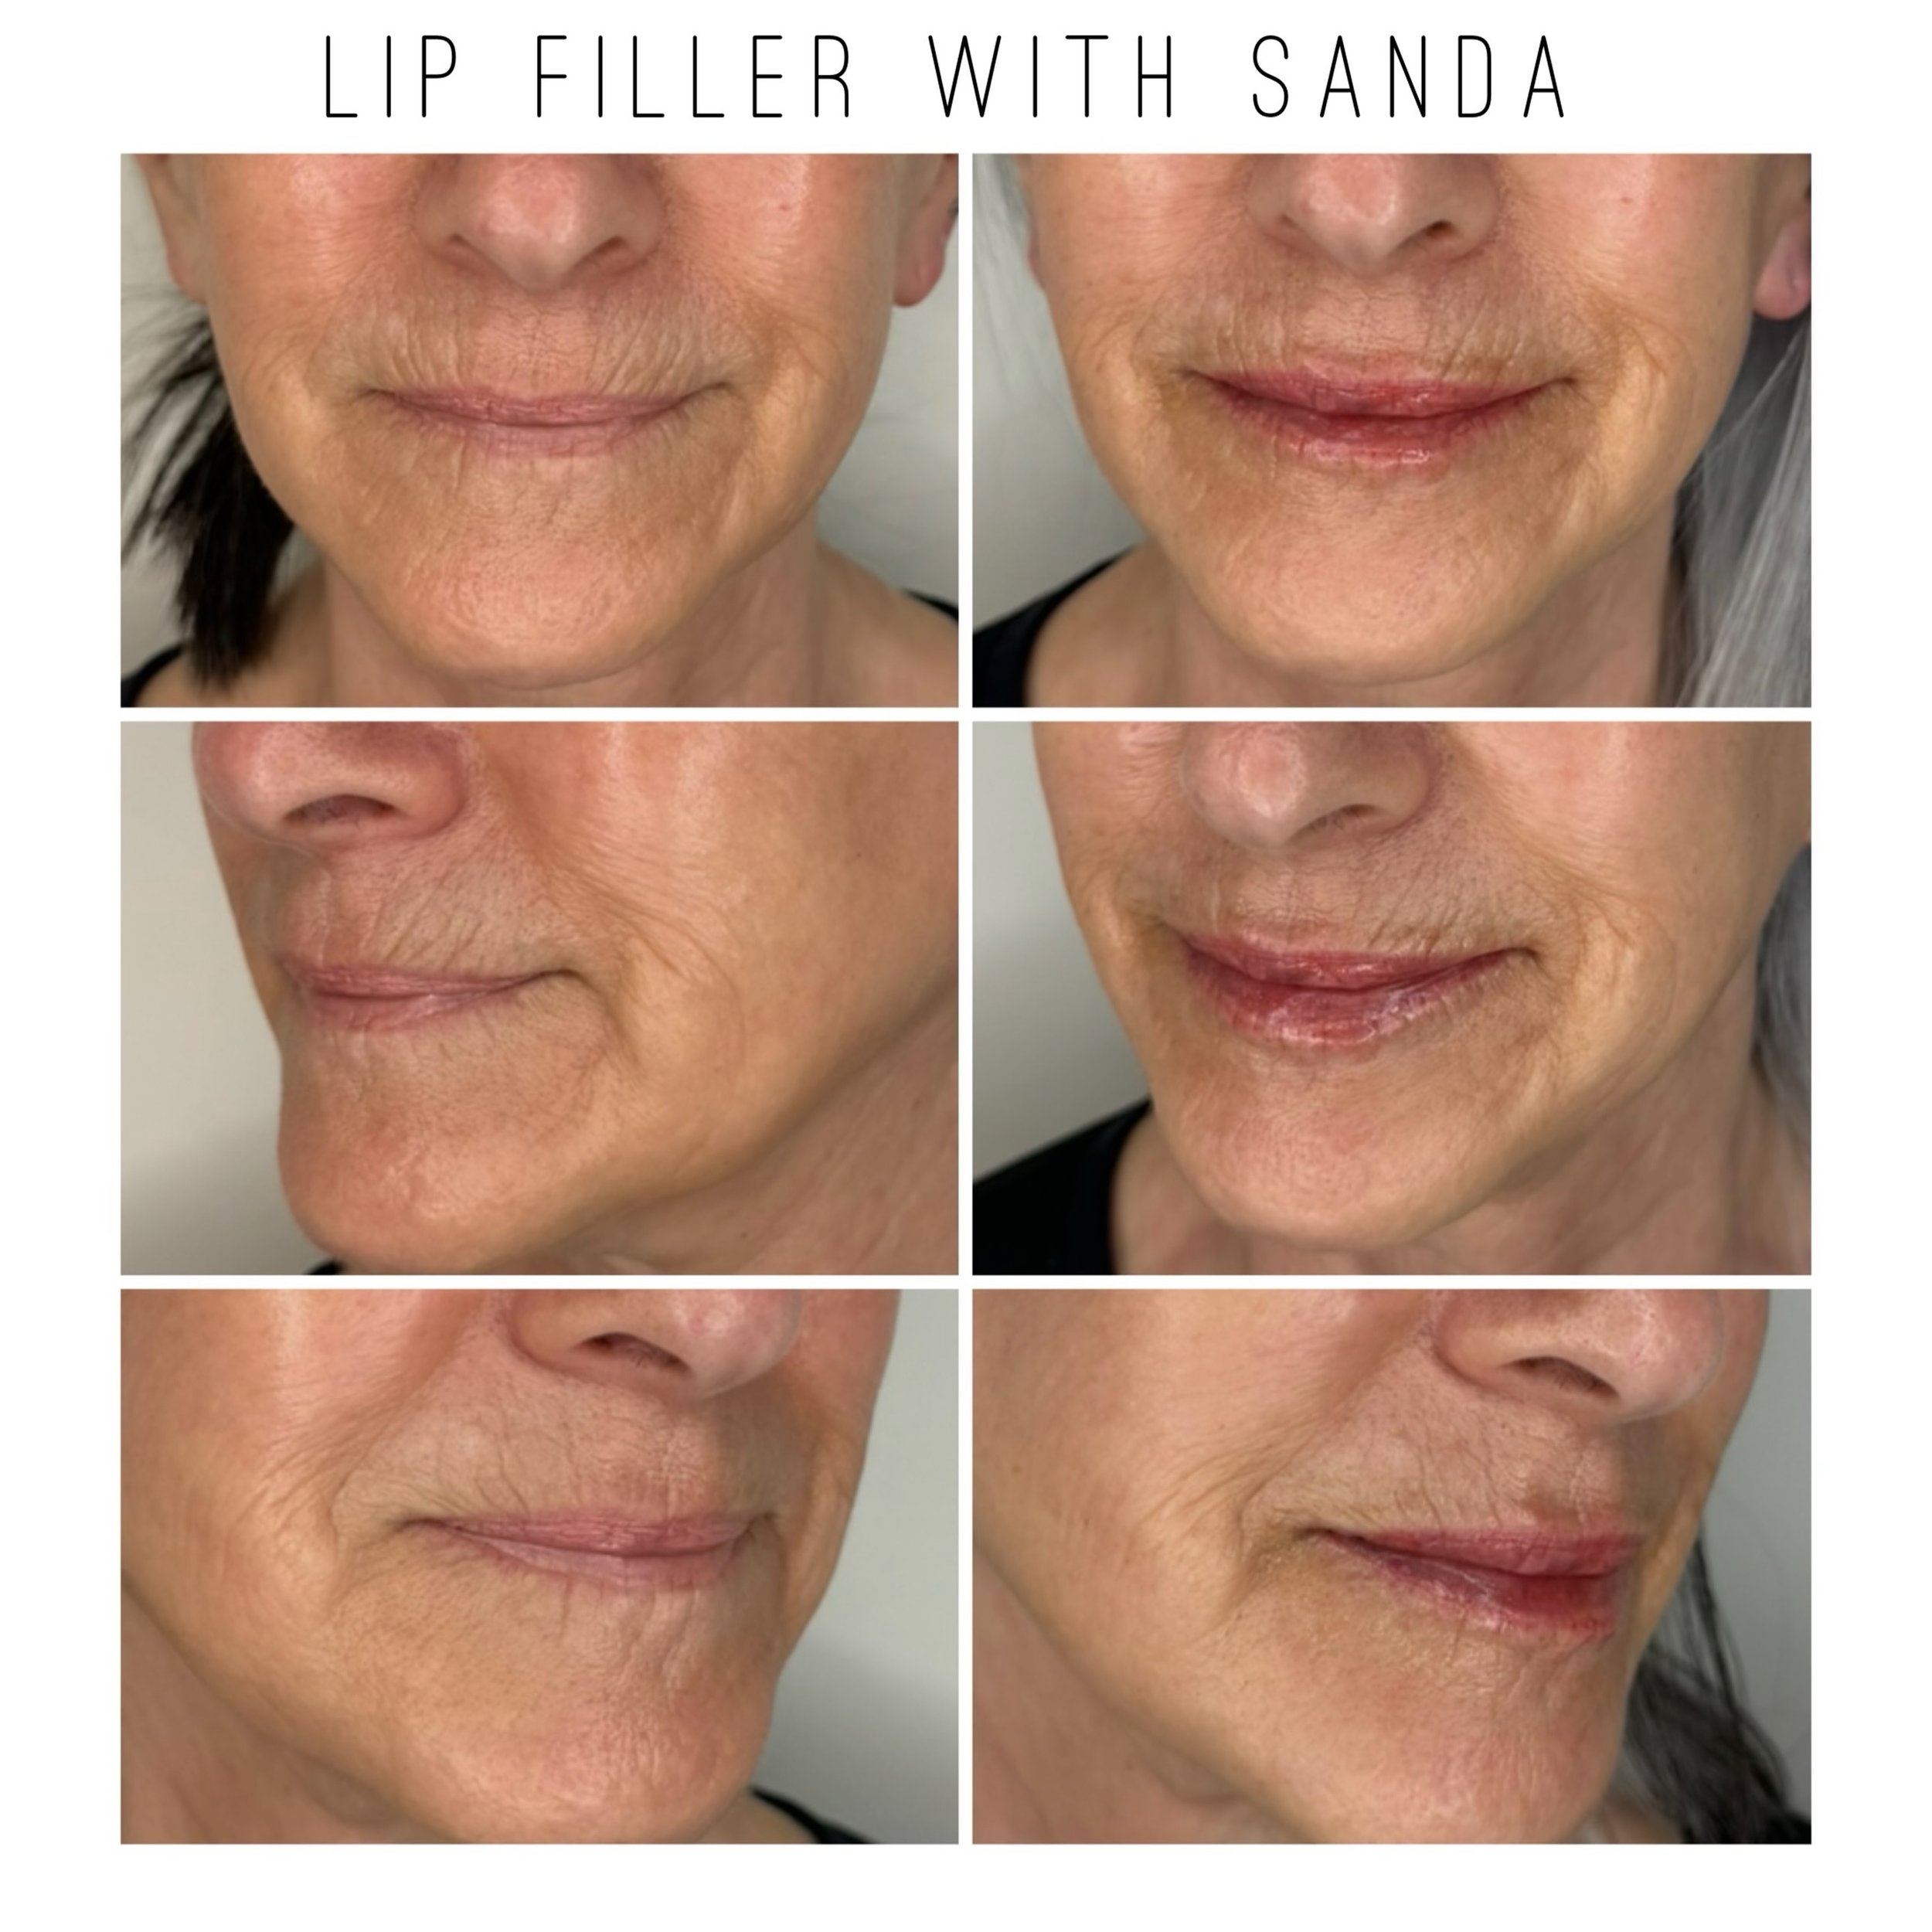 First images show before and two weeks after treatment. Second images show before and immediately after treatment.  Enhance your natural beauty with lip filler treatment! 💋 Say goodbye to dryness and hello to a subtle pout that hydrates your lips an